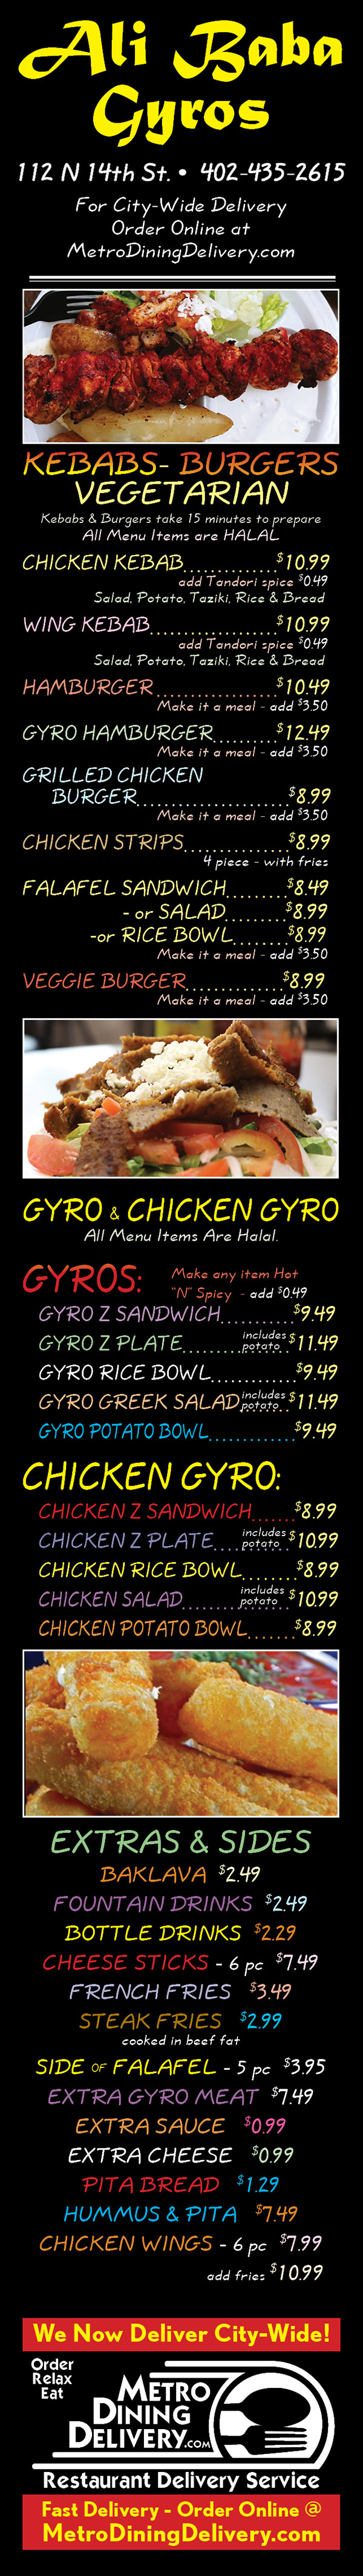 Ali Baba Gyros 
  112 N 14th St 
  402-435-2615
~Gyro Sandwiches~
Extra meat add $5.50 
Extra sauce add 99¢ - Extra cheese add 60¢
Gyro Sandwich		$7.99
	Spiced meat served on pita bread with onion,
	tomato, and cucumber sauce.
Hot & Spicy Gyro		$7.99
	A wonderful kick to a classic taste.
Gyro Plate (Reg. or Hot-N-Spicy)	$8.99
	Gyro sandwich with extra meat & steak fries.
“Z” Sandwich		$7.99
	Gyro sandwich with a feta cheese topping.
“Z” Plate		$8.99
	“Z” sandwich with extra meat and steak fries.
Hot-N-Spicy “Z” Sandwich	$8.49
Hot-N-Spicy “Z” Plate		$9.49
	“Z” sandwich with extra meat and steak fries.
Philly Steak Pita		$9.99
	Philly served on pita bread with tomato, 
	lettuce, sauteed onions, and cheese. w/ fries
Hot-N-Spicy Philly Steak	$9.99
Gyro Special		$8.99
	Gyro meat served w/rice and a salad.
Greek Salad (Reg. or Hot-N-Spicy)	$8.99
	Lettuce tomato, onion, feta, gyro meat, 
	& cucumber sauce with steak fries.
Light Lunch (Rice Kebab)		$8.99
	Rice topped with gyro meat, tomato, onion 
	& cucumber sauce.









~Burgers~
Add fries for only $1.99
Homemade Hamburger		$6.99
Homemade Cheeseburger	$6.99
Gyro Cheeseburger 		$8.99

